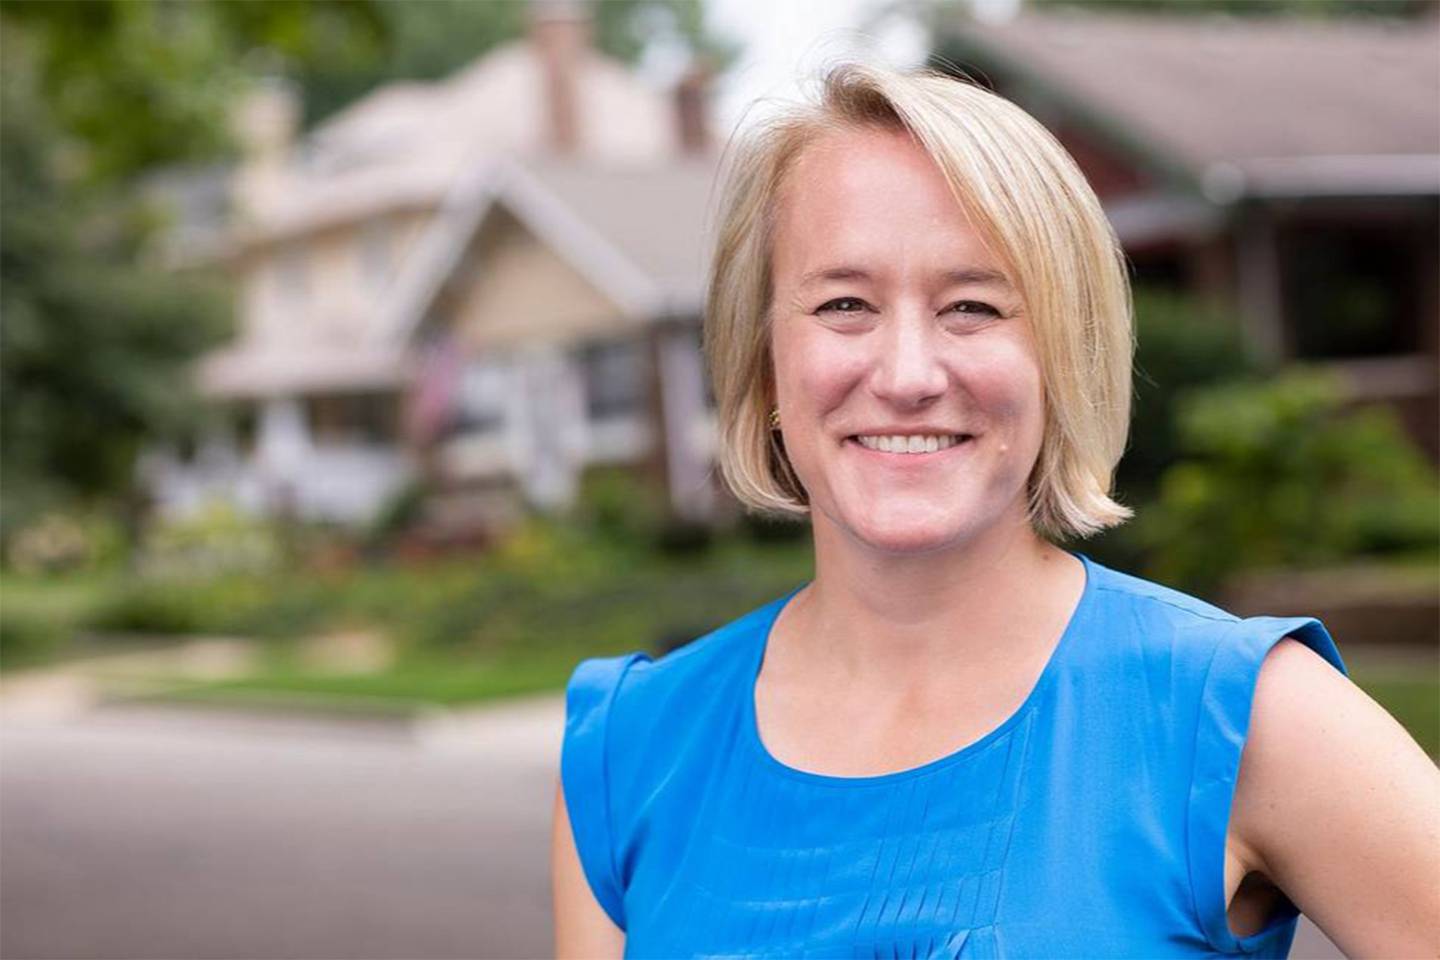 Nikki Budzinski is running as a Democrat for the 13th District Congressional seat in central Illinois.